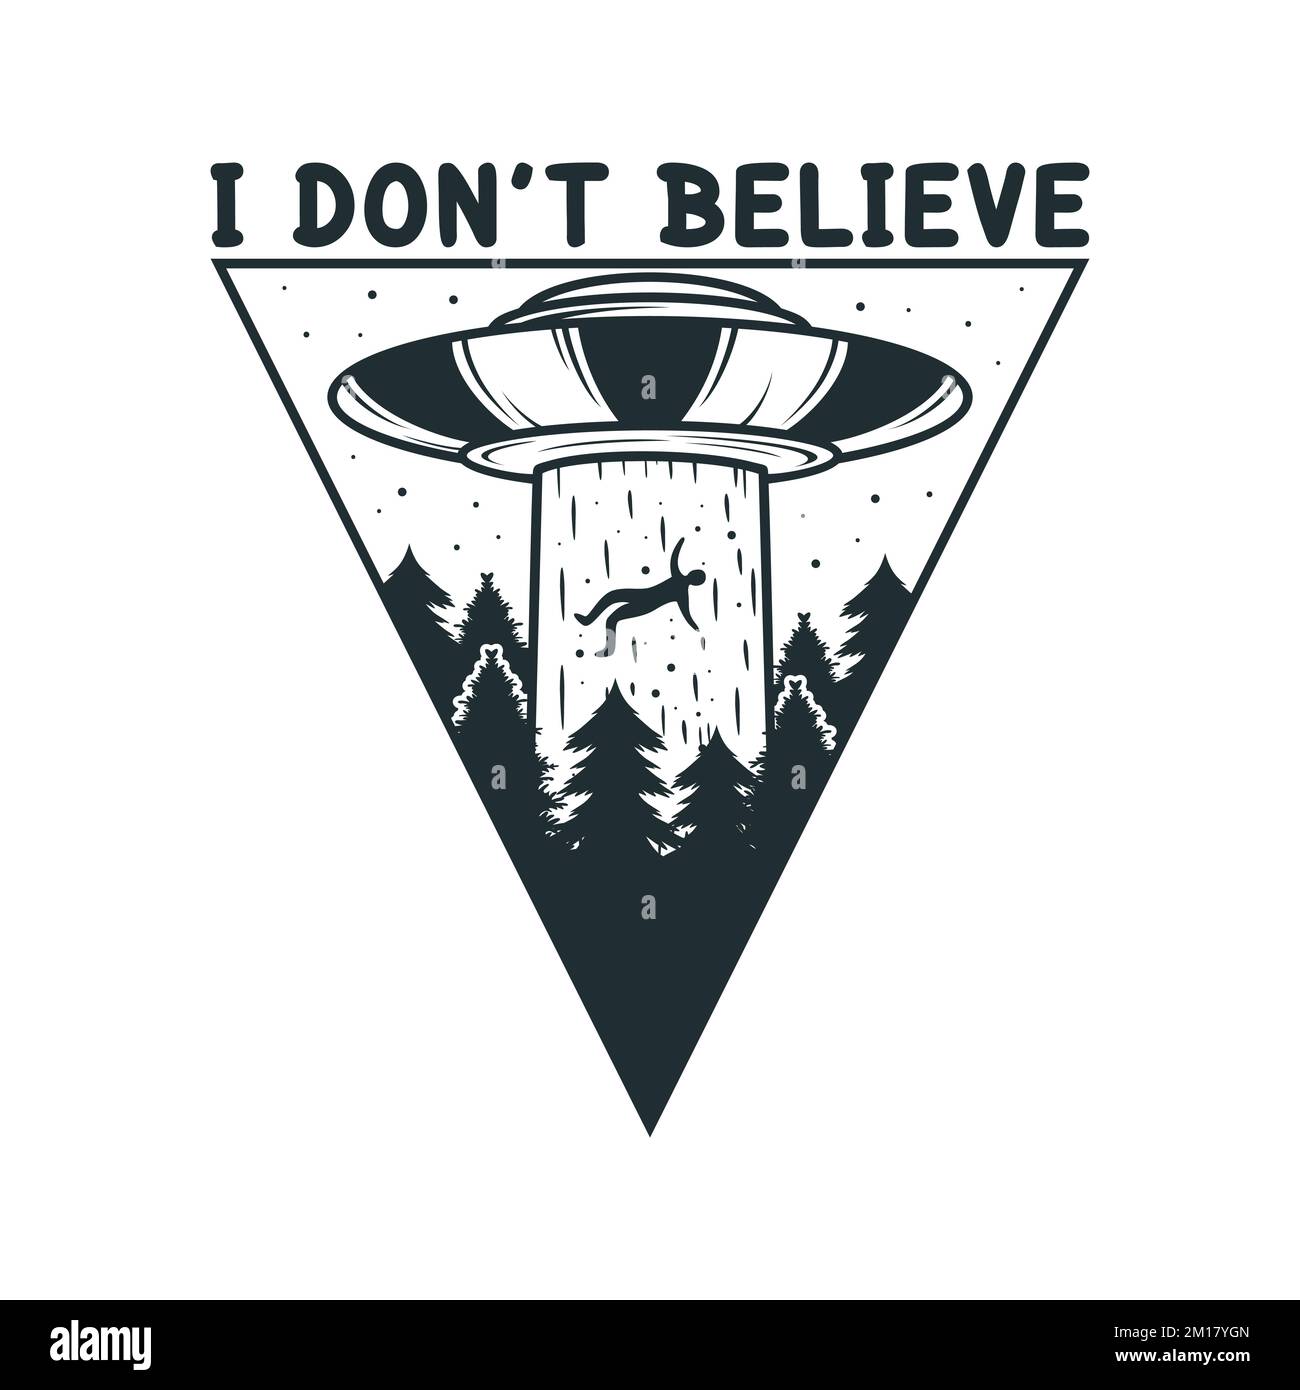 I Don't Believe, Alien and UFO Typography Quote Design. Stock Vector